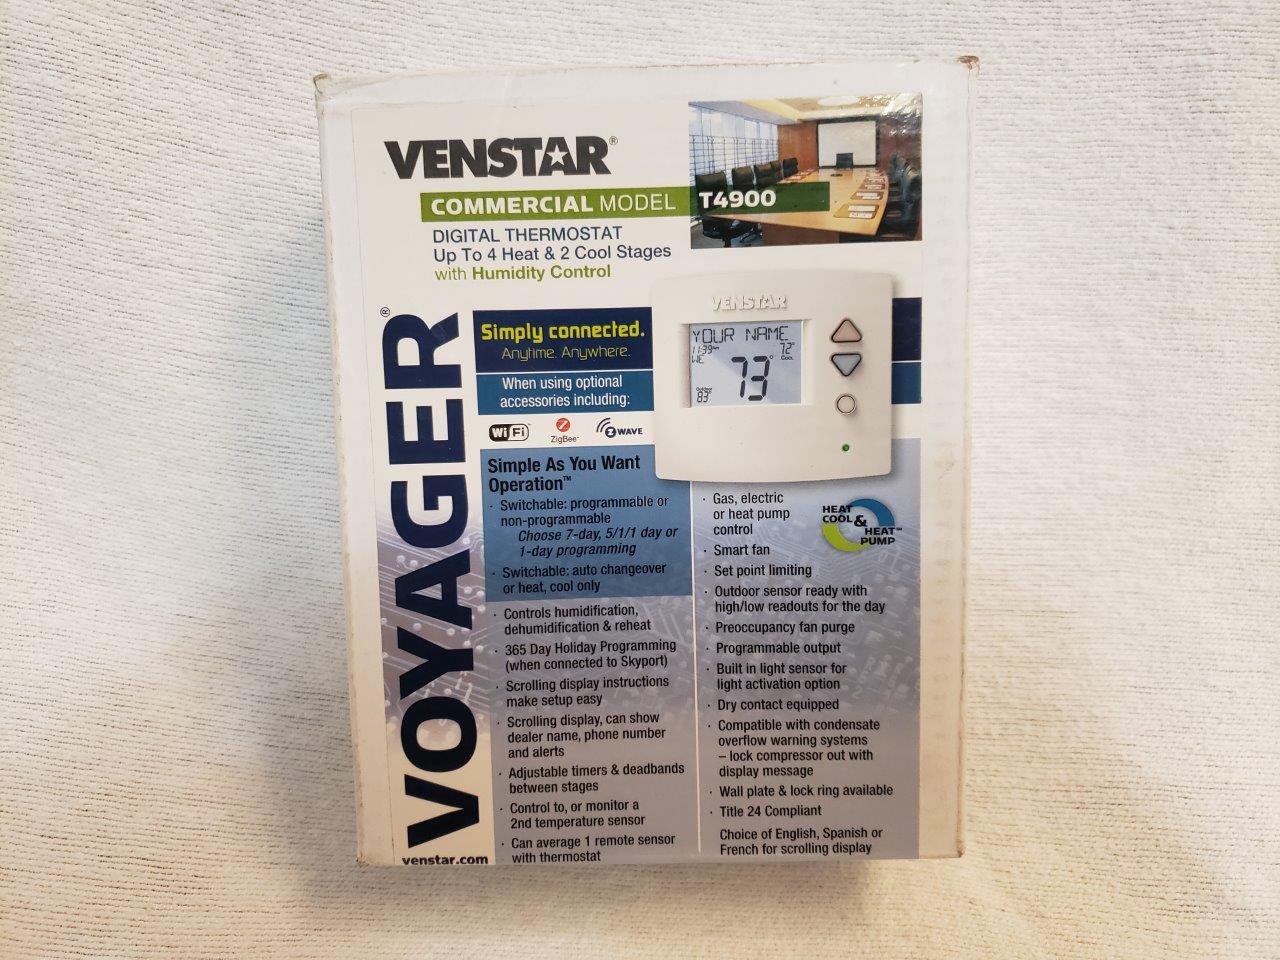 Venstar Voyager T4900 Commercial Digital Thermostat (4 Heat, 2 Cool) New Wi-Fi Programmable